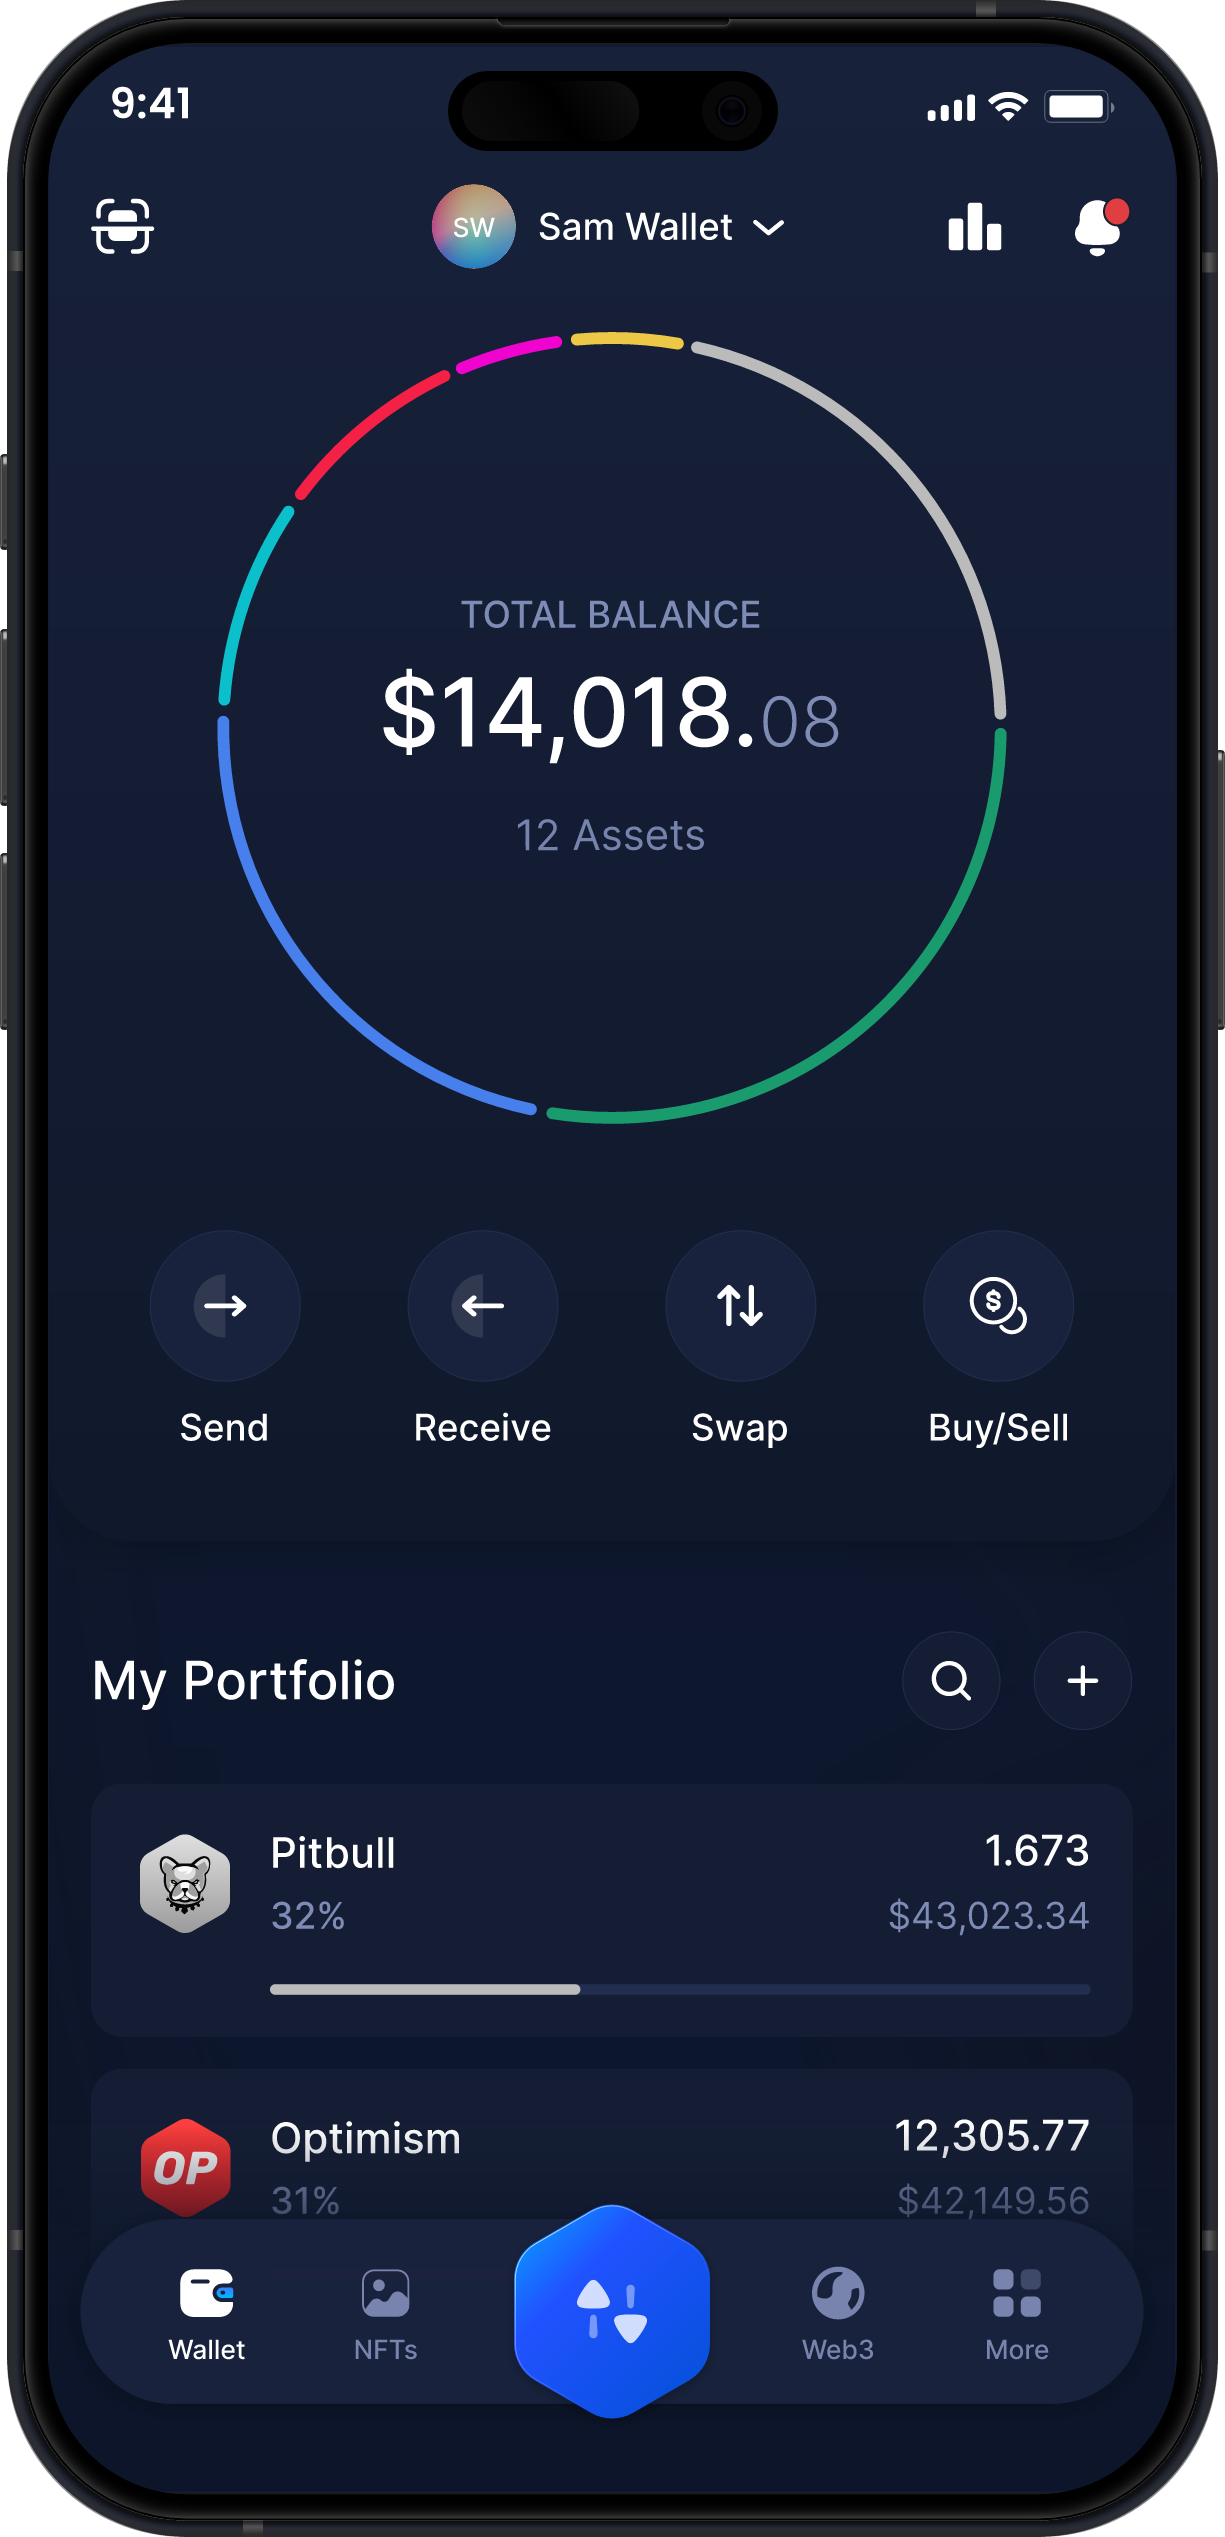 Infinity Mobile Pitbull Wallet - Dashboard PIT